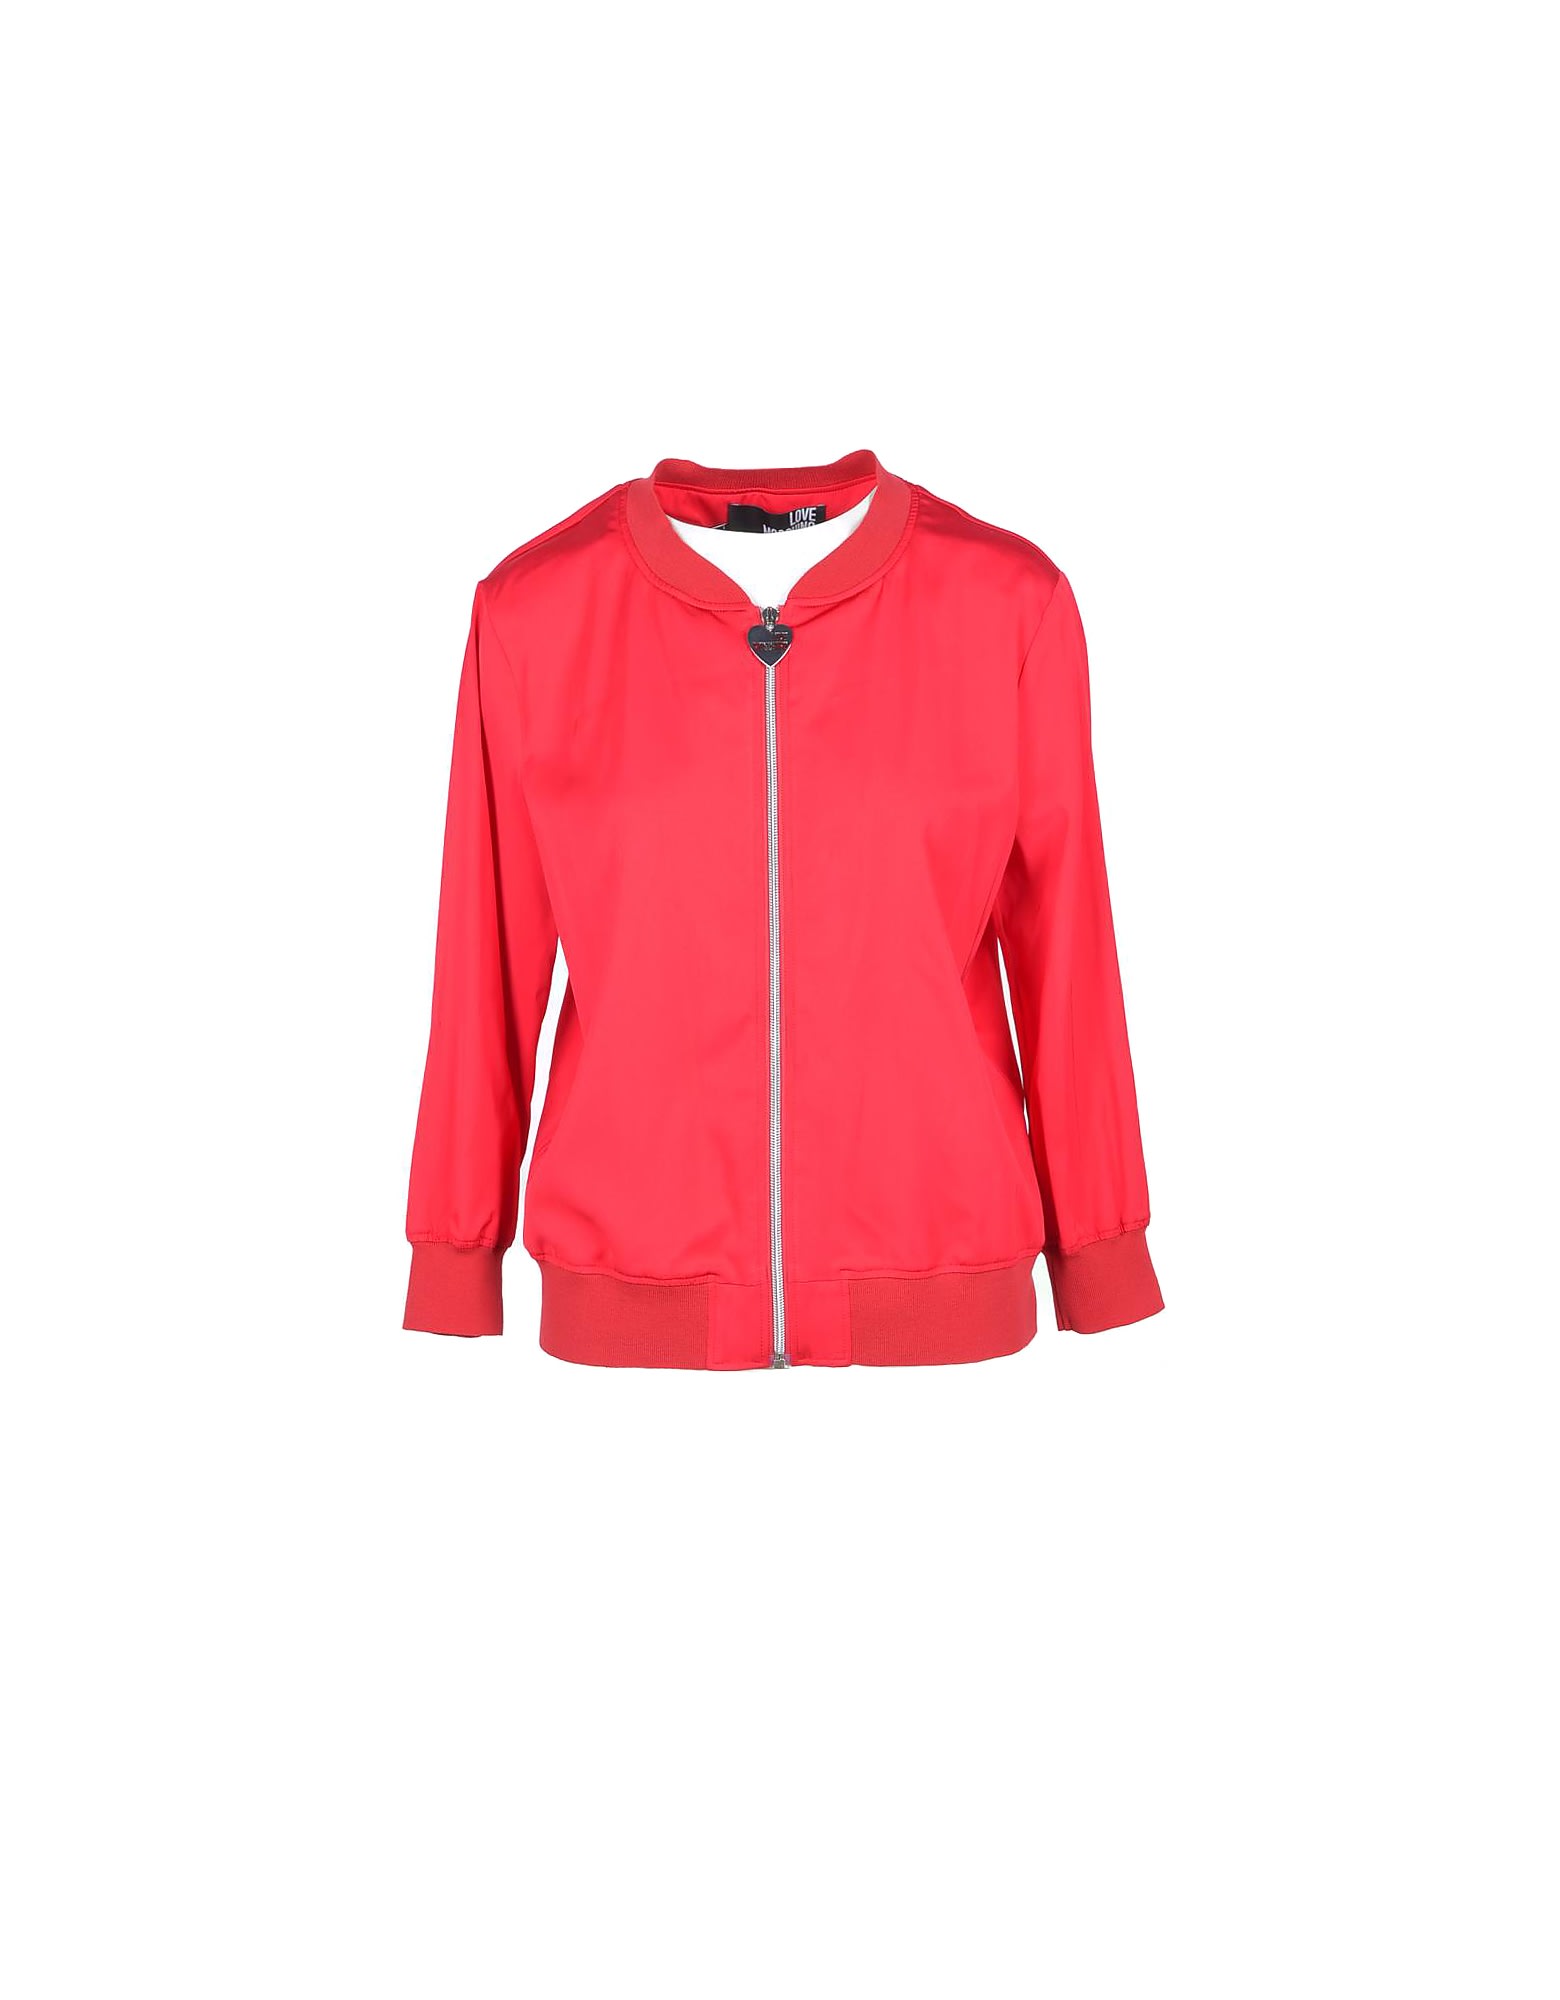 Love Moschino Womens Red Viscose Blend Bomber Jacket